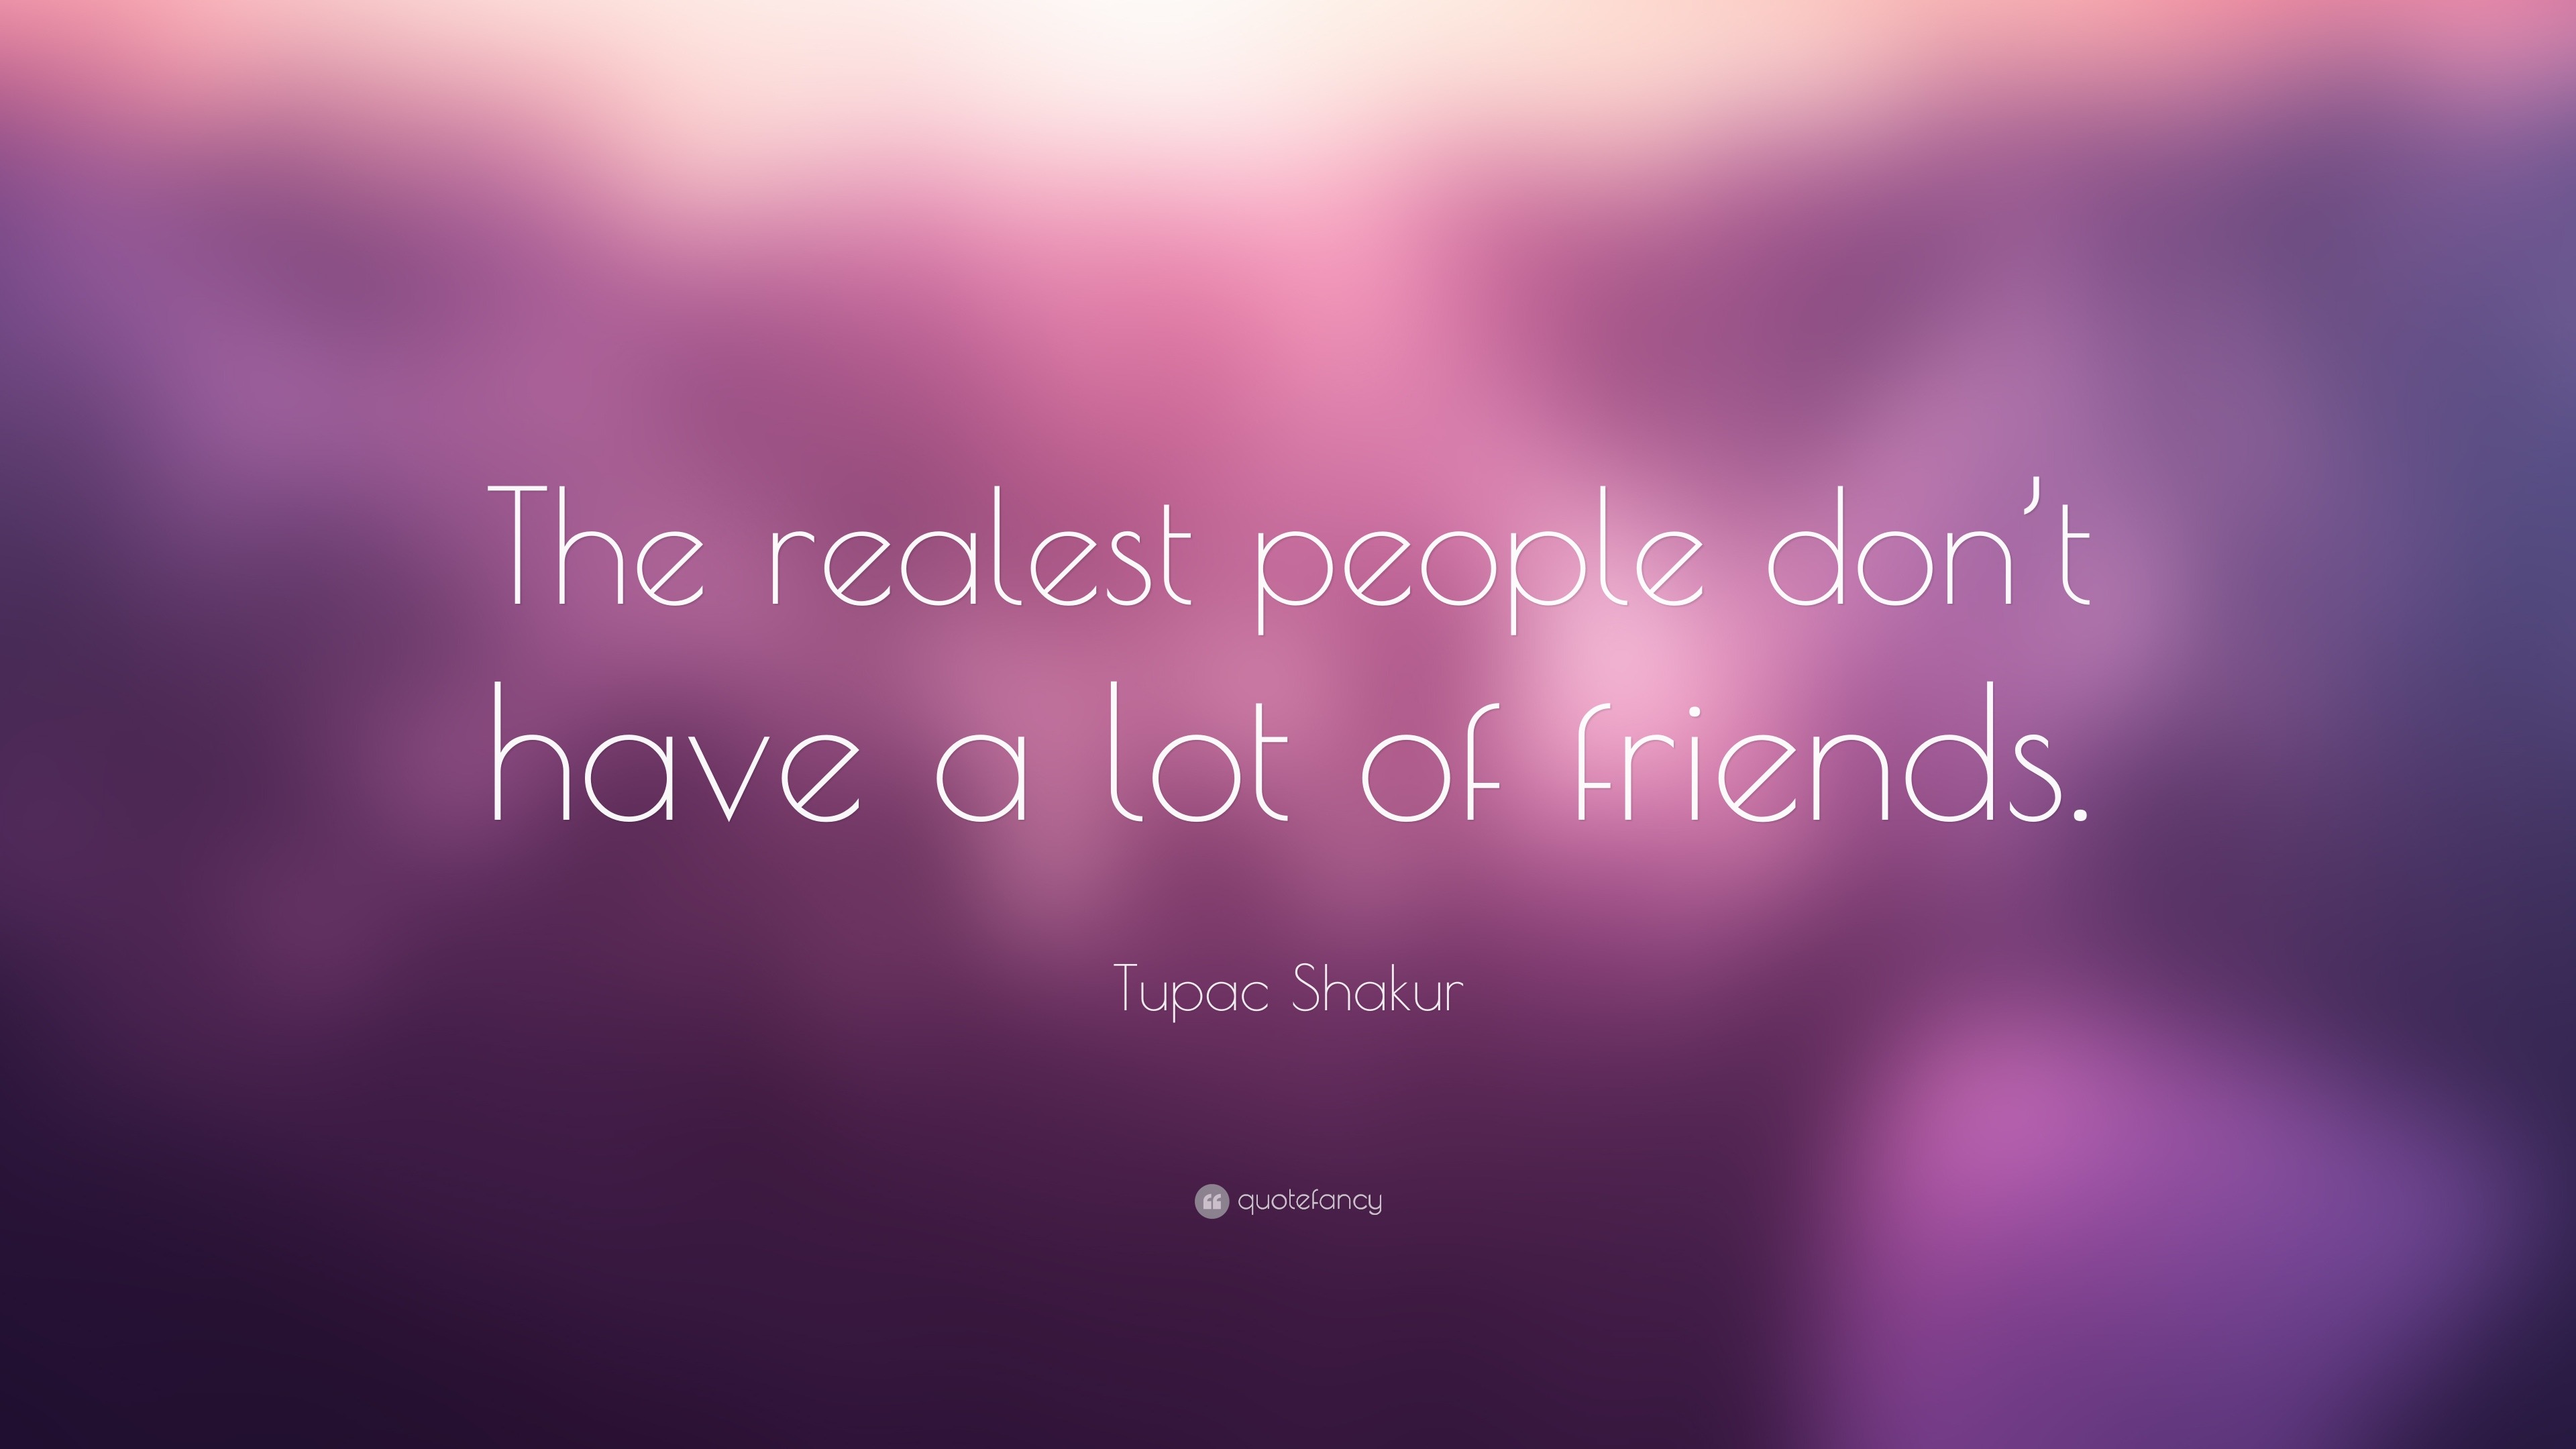 Tupac Shakur Quote: “The realest people don't have a lot of friends.”